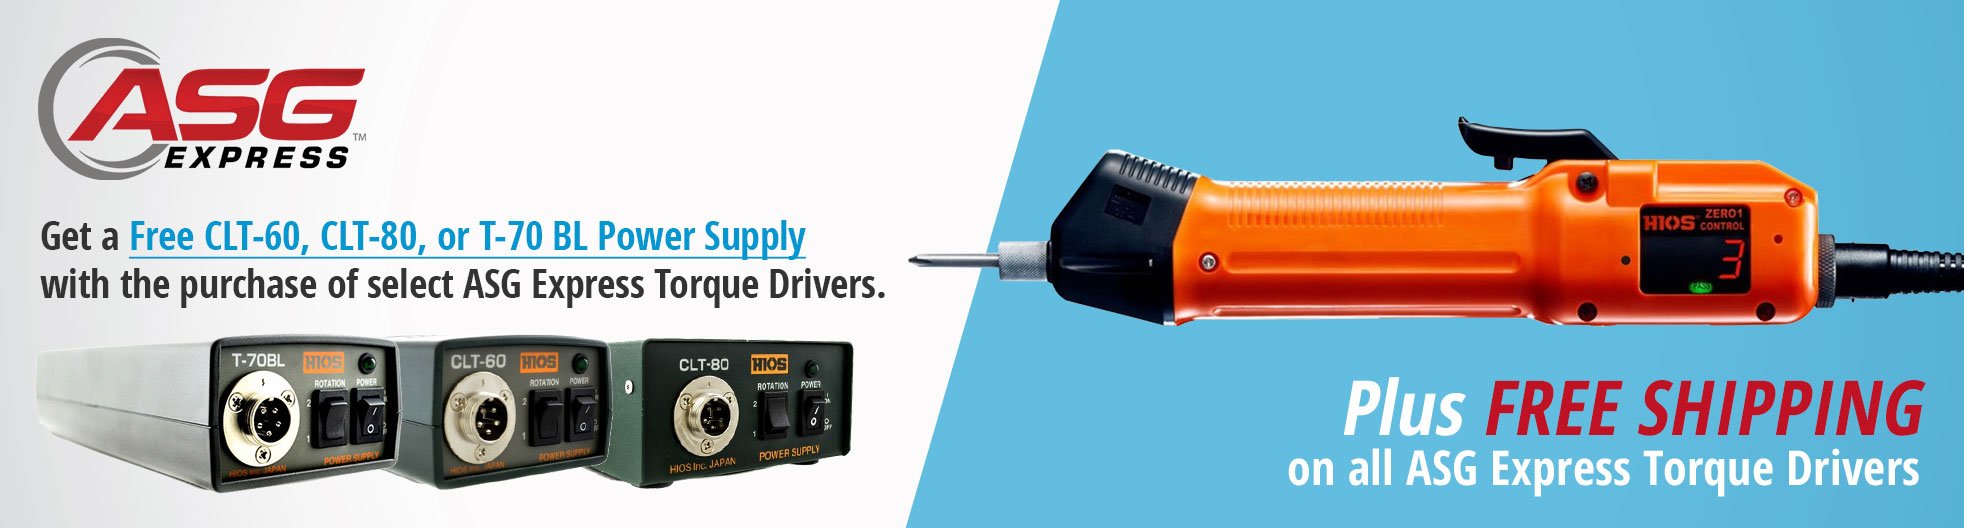 Get a free Power Supply when you buy select ASG DC Electric Torque Drivers